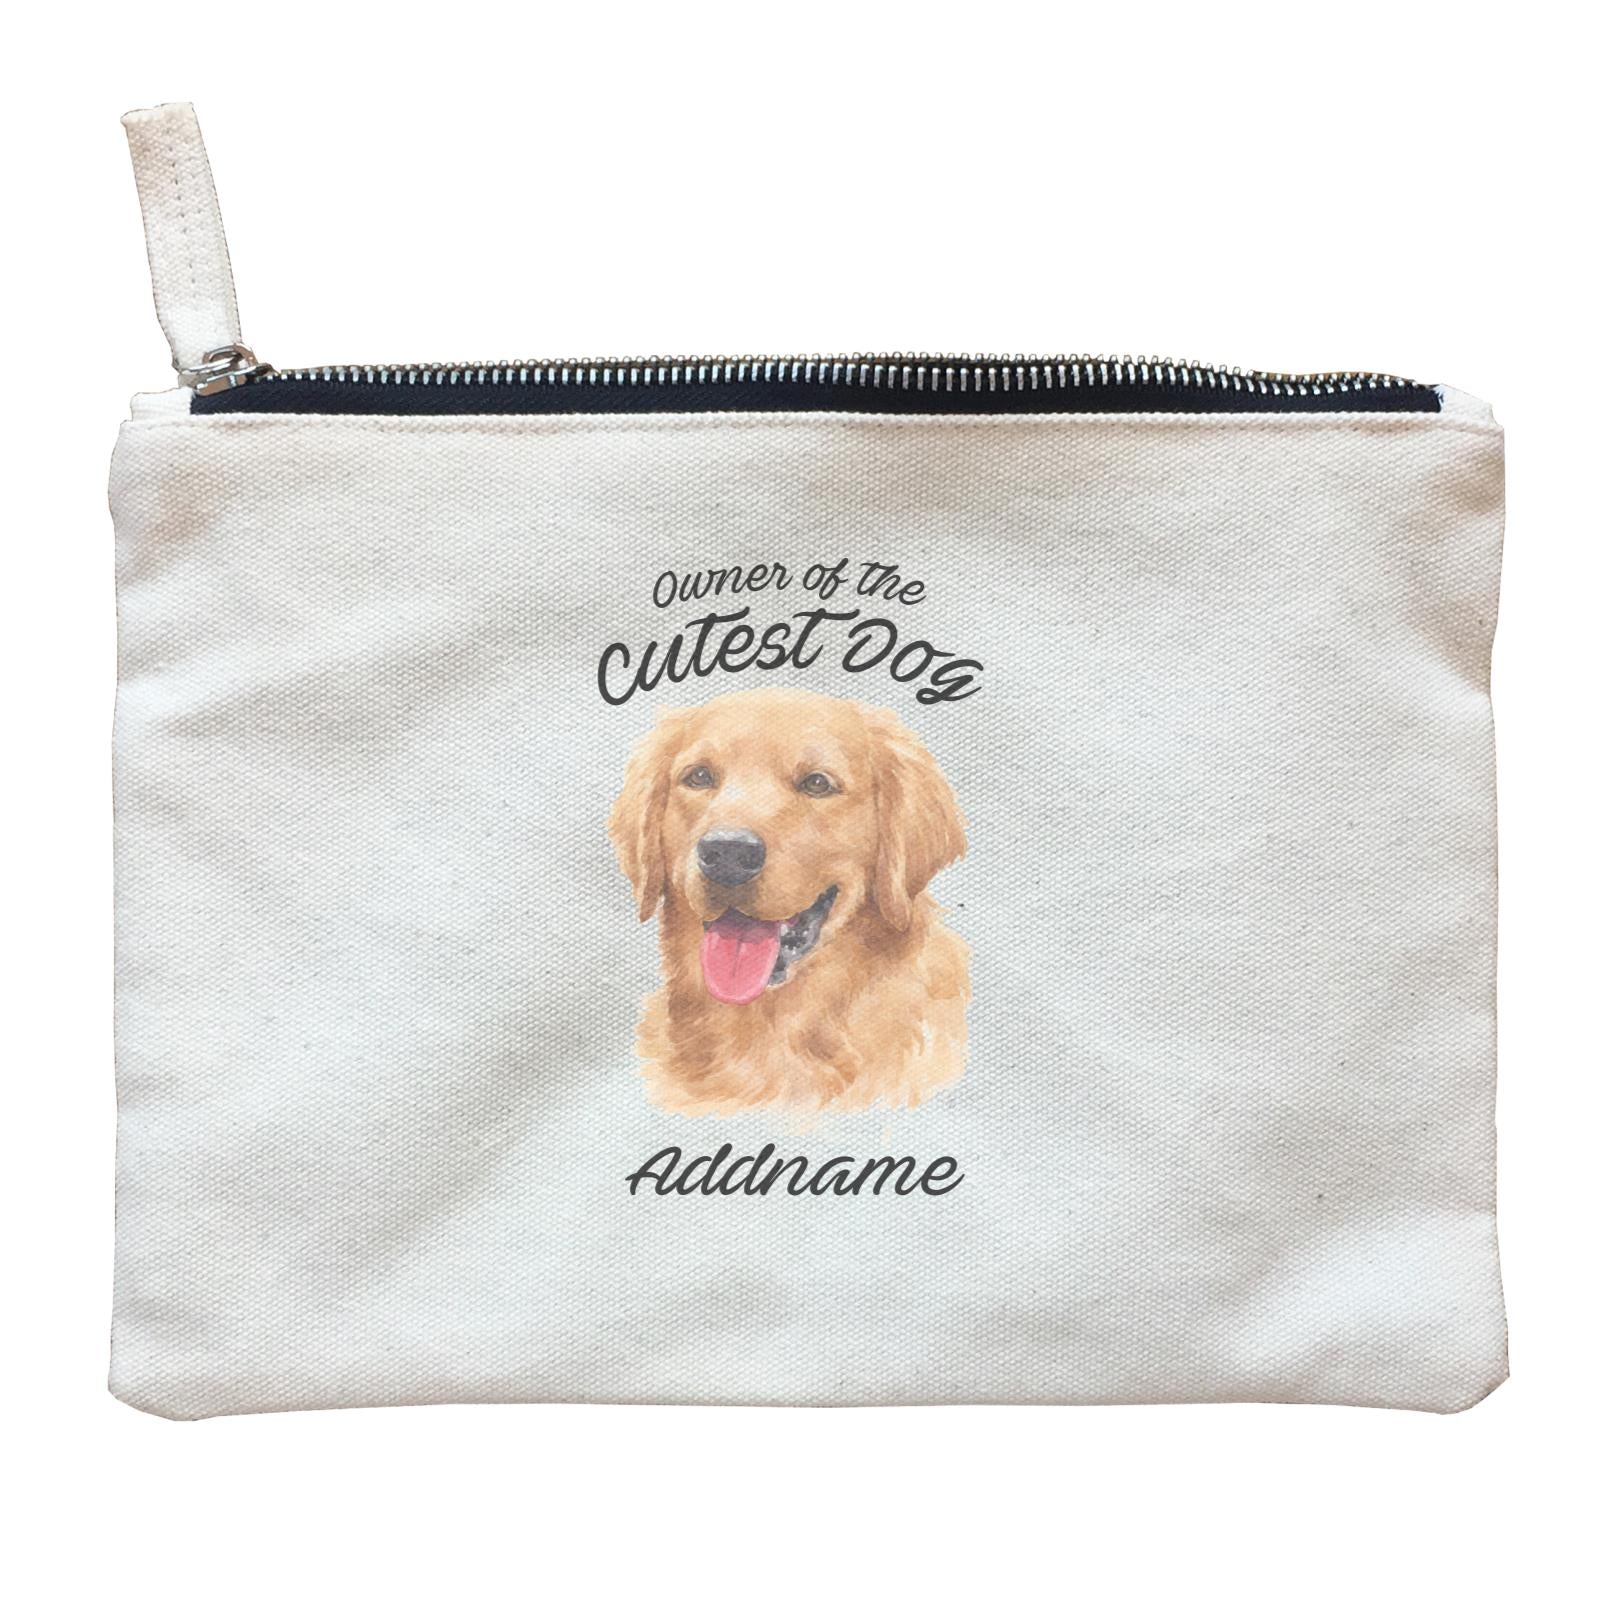 Watercolor Dog Owner Of The Cutest Dog Golden Retriever Addname Zipper Pouch